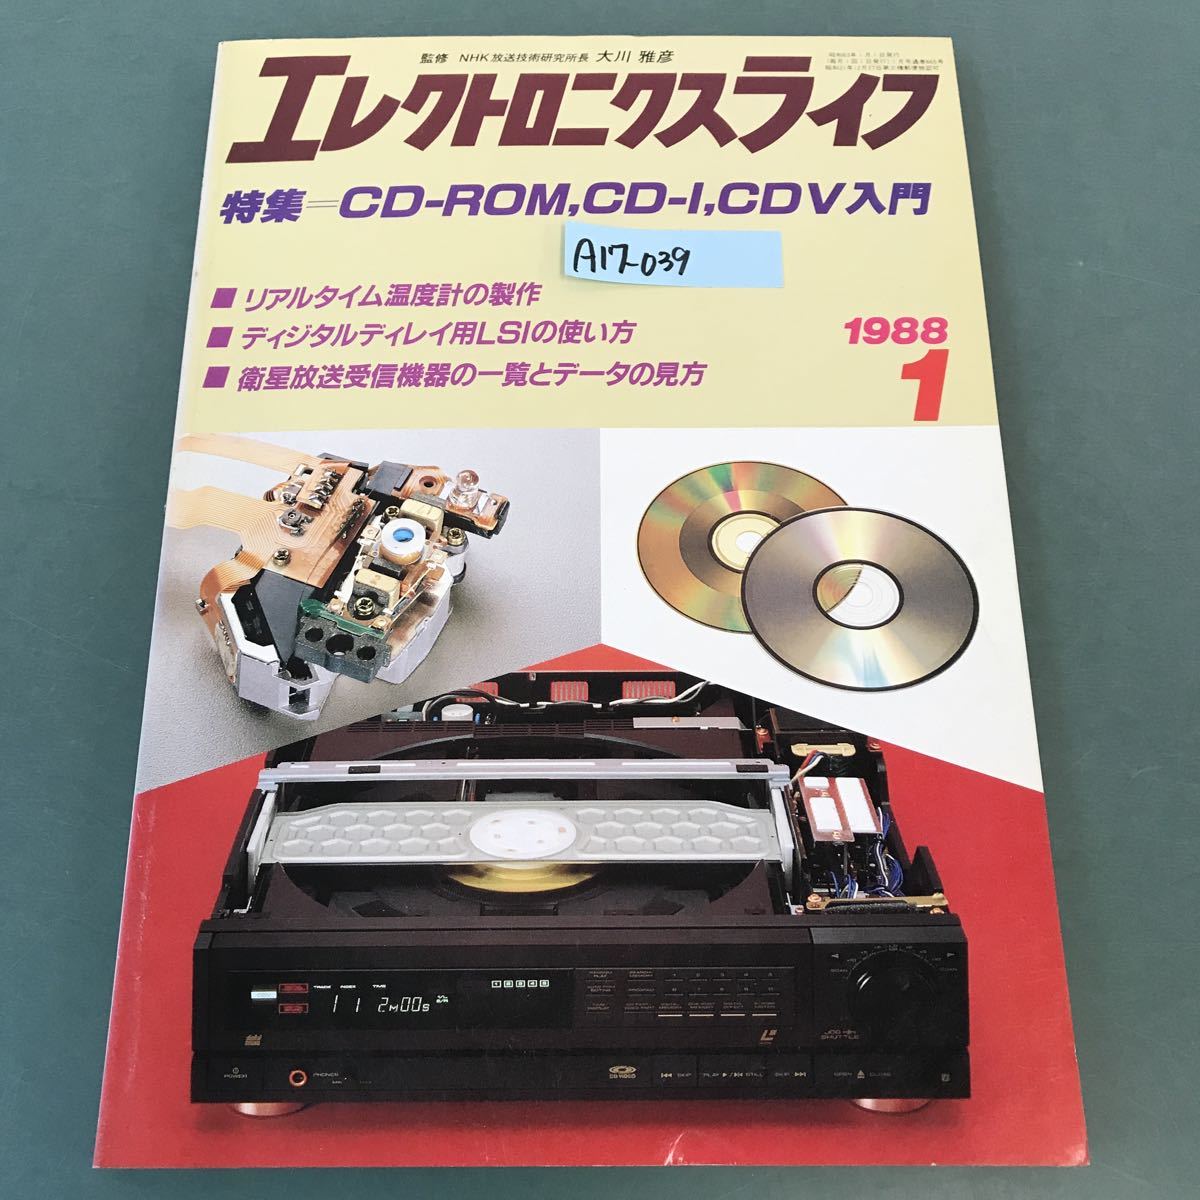 A17-039 electronics life special collection CD-ROM,CD-I,CDV introduction 1988 year 1 month number 